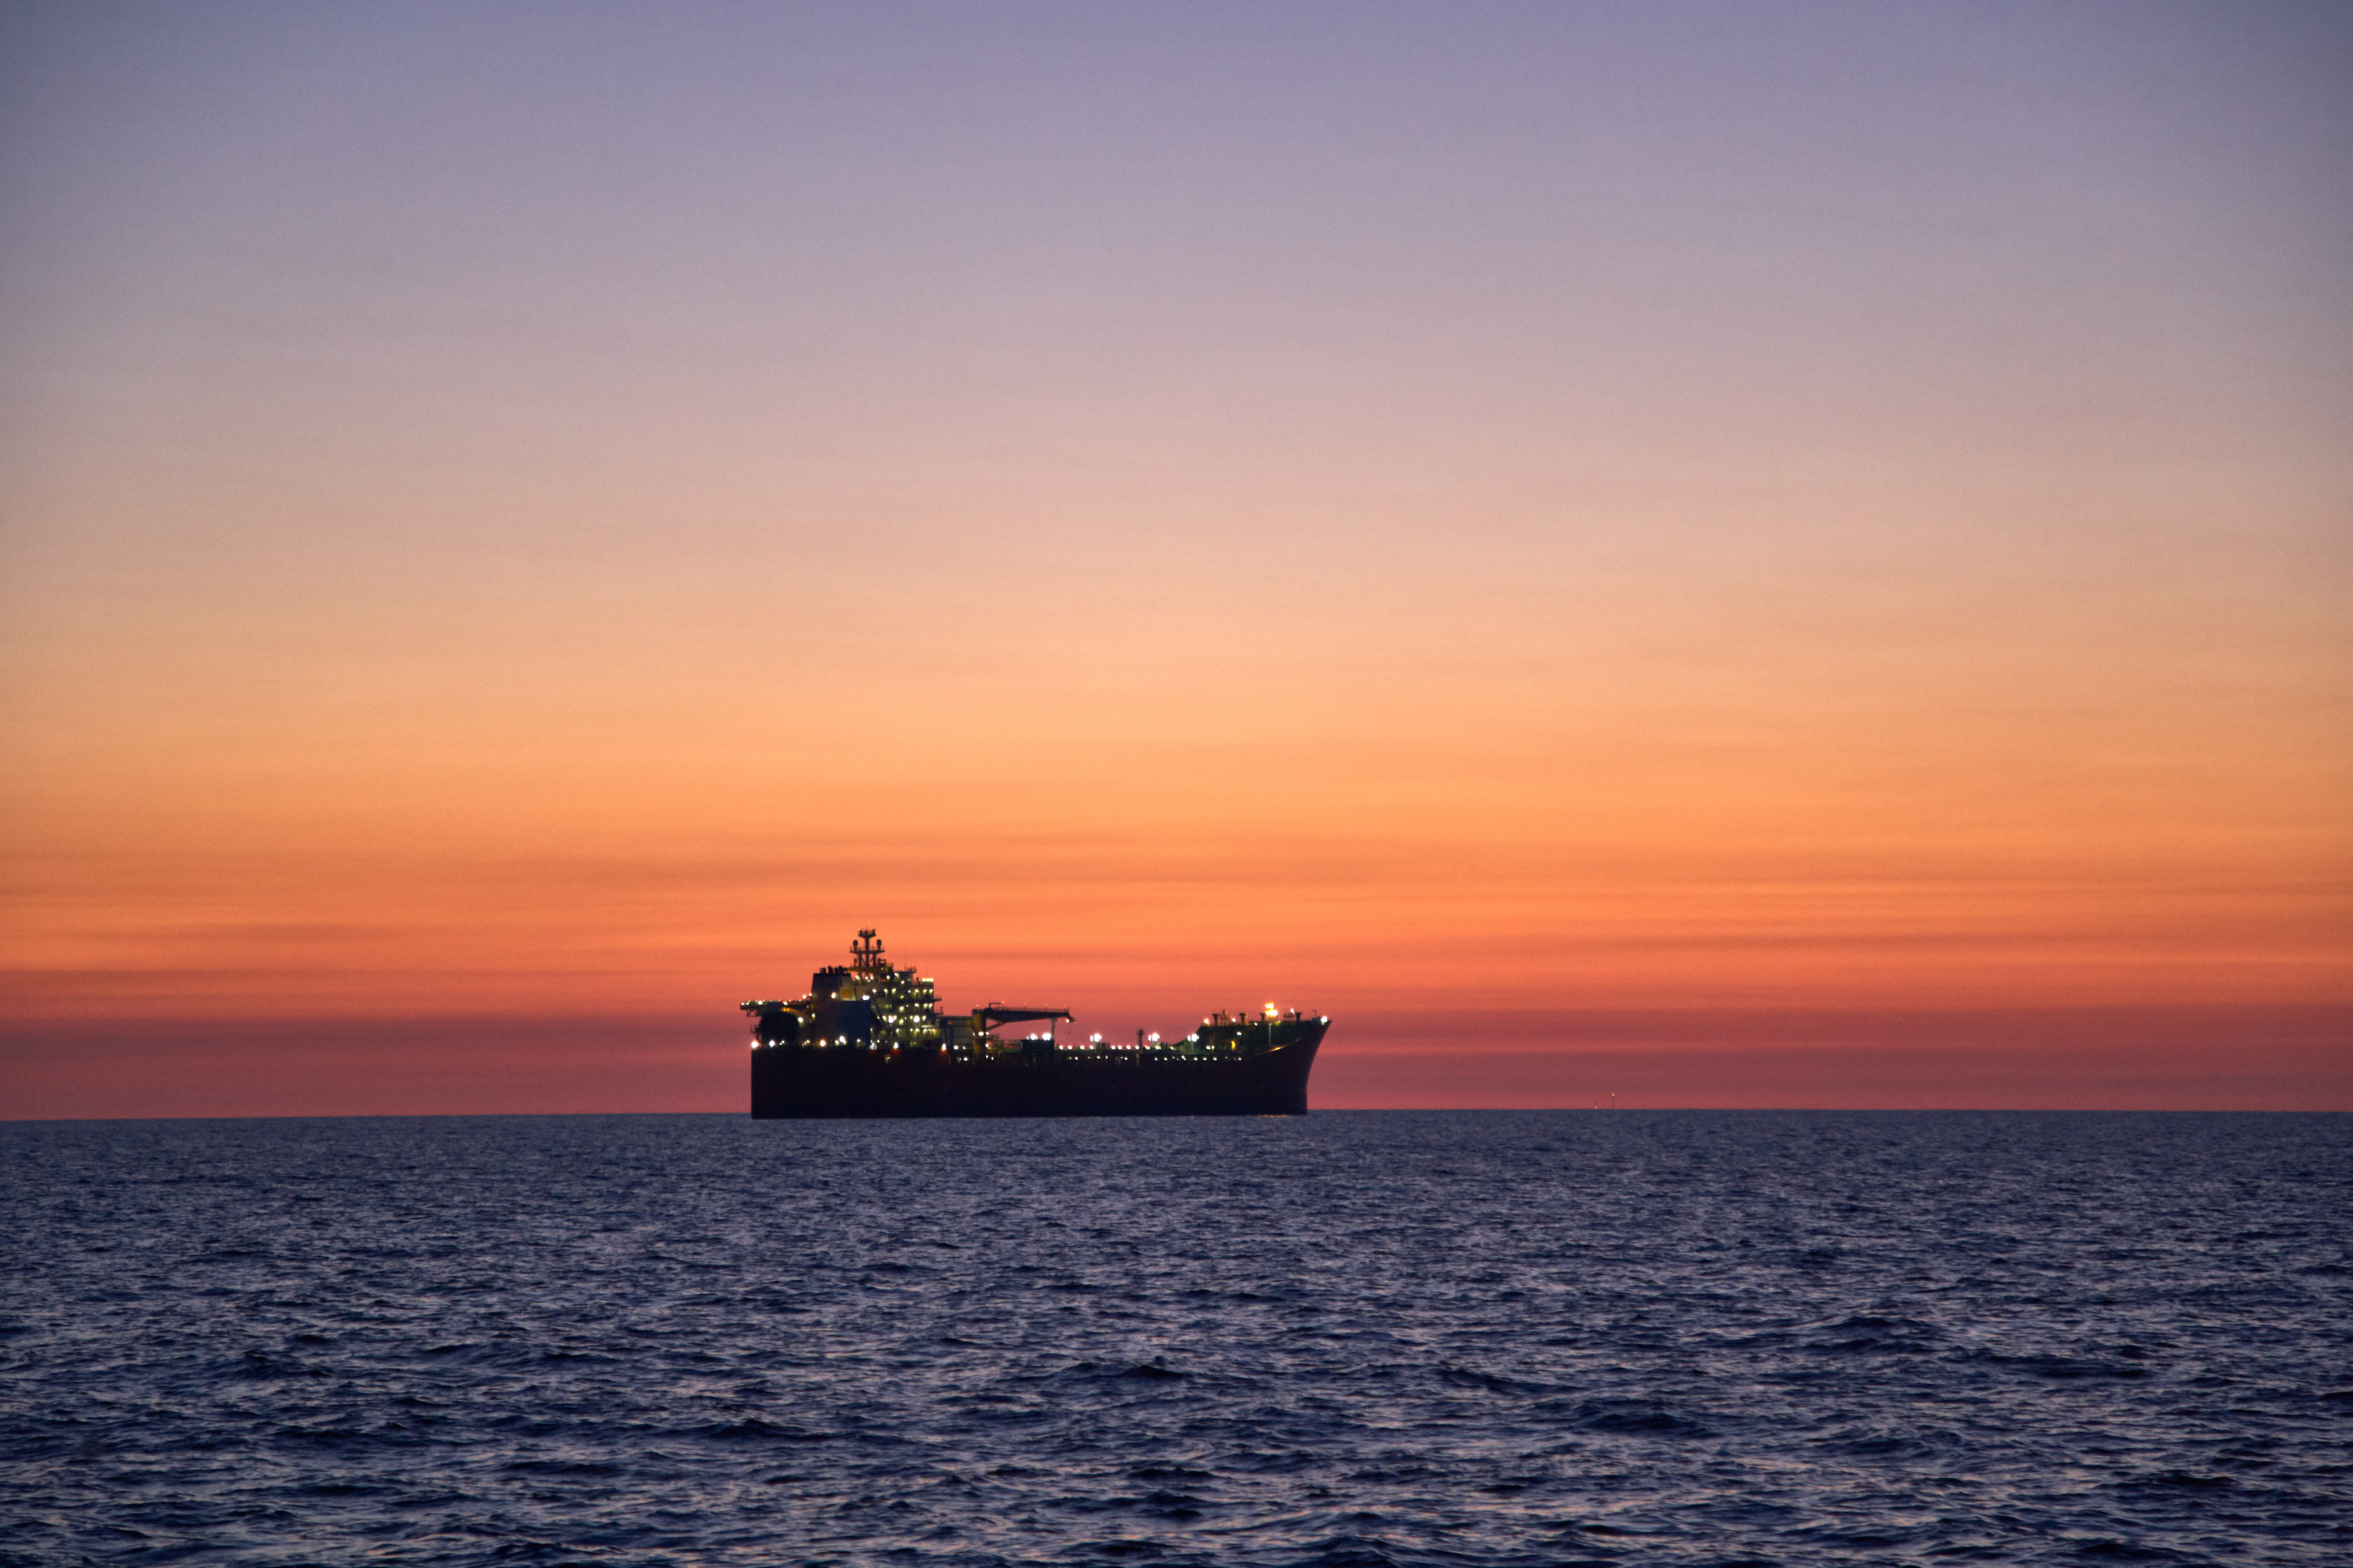 Floating production storage and offloading (FPSO) vessels are used around the world for processing oil and transferring this resource to tankers or pipelines that transport it to refineries. [Image source: shutterstock_1588458184]